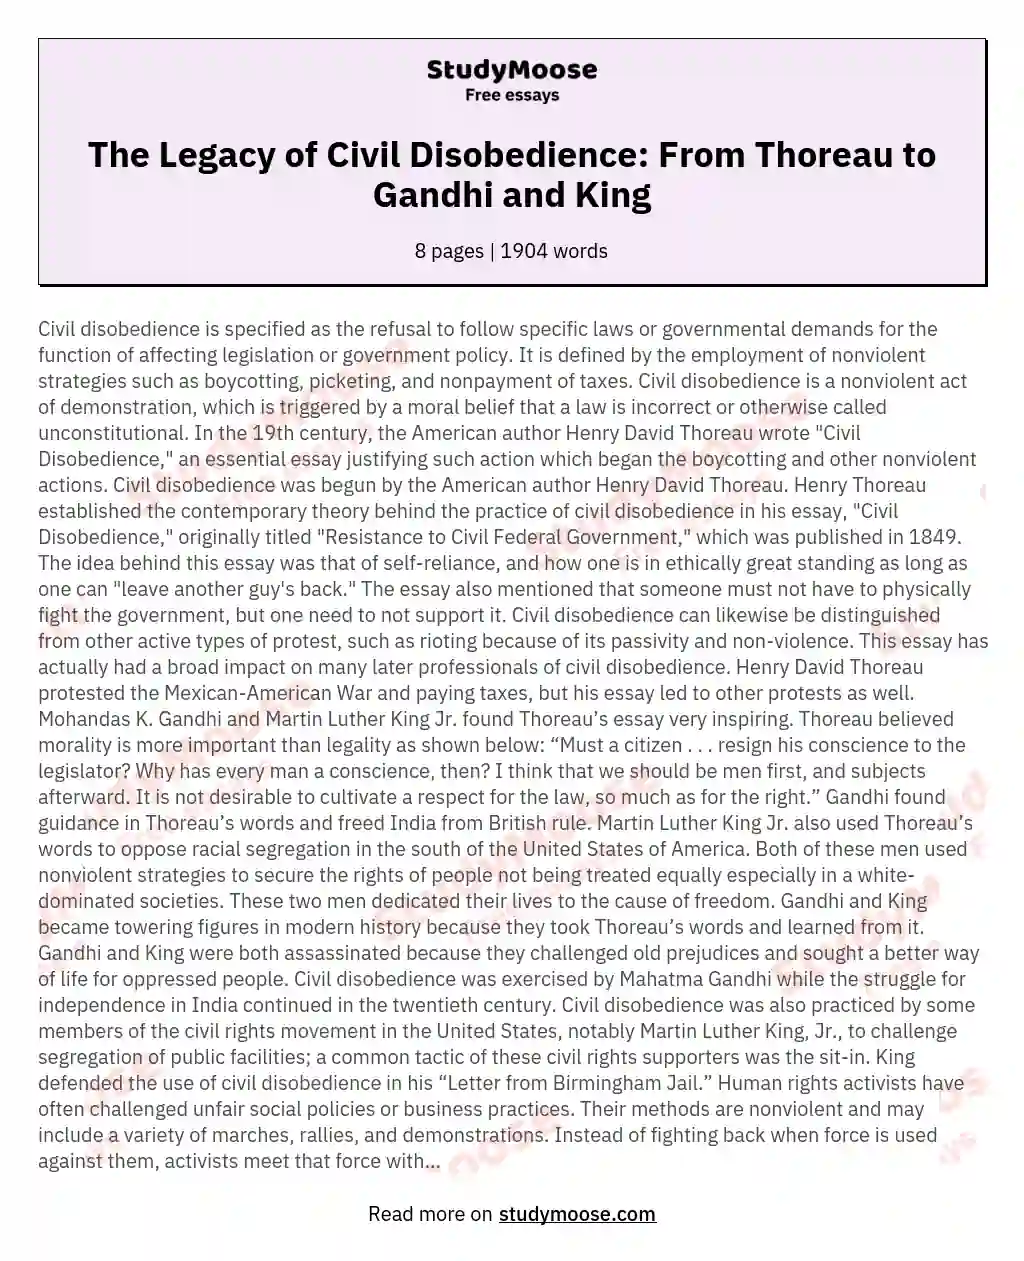 The Legacy of Civil Disobedience: From Thoreau to Gandhi and King essay